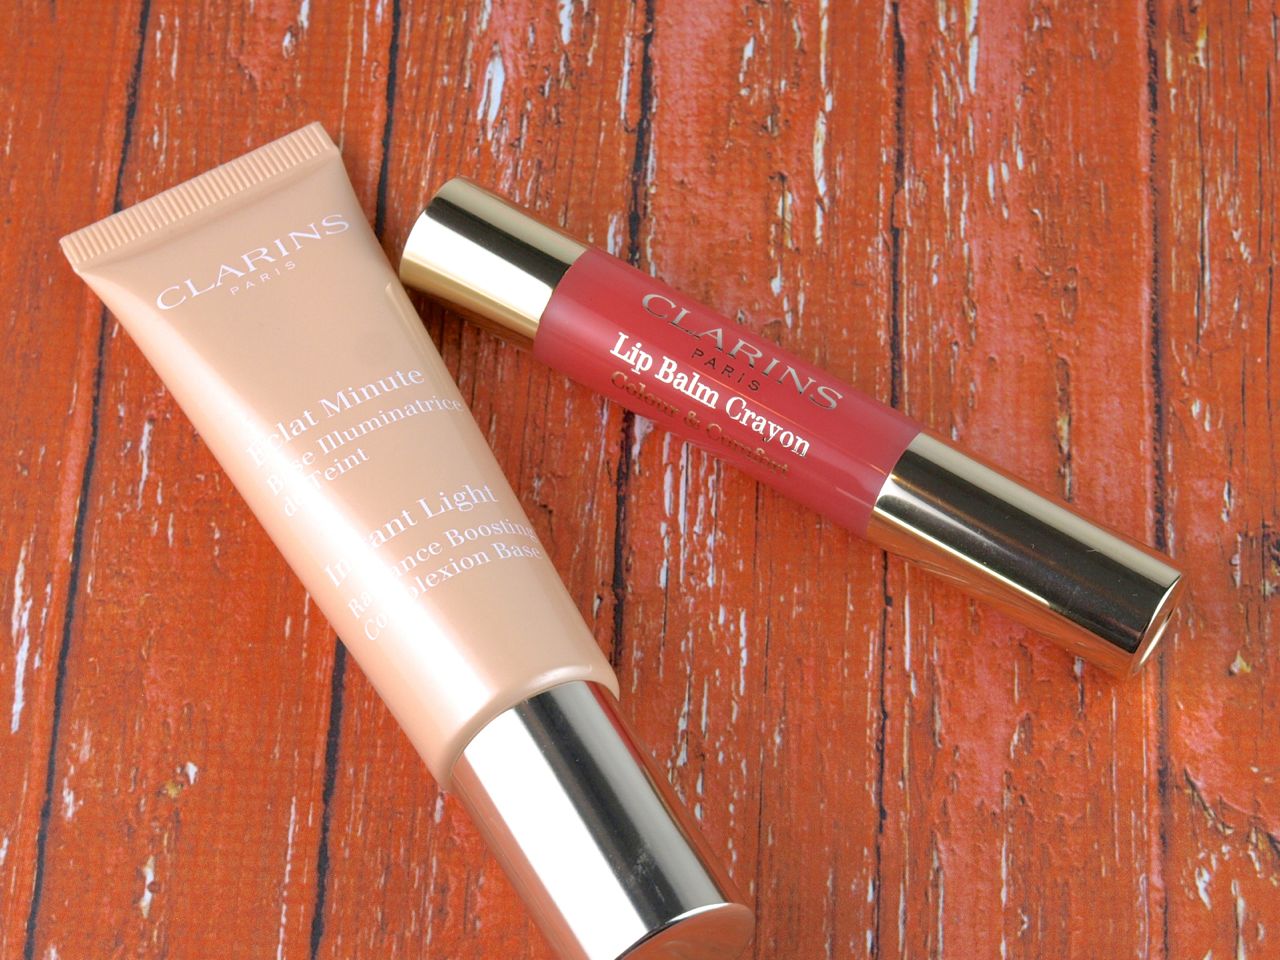 Clarins Instant Light Boosting Complexion Base in "Champagne" & Lip Balm Crayon in "Creamy Pink": Review and Swatches | The Beauty, Makeup, and Skincare Blog Reviews and Swatches